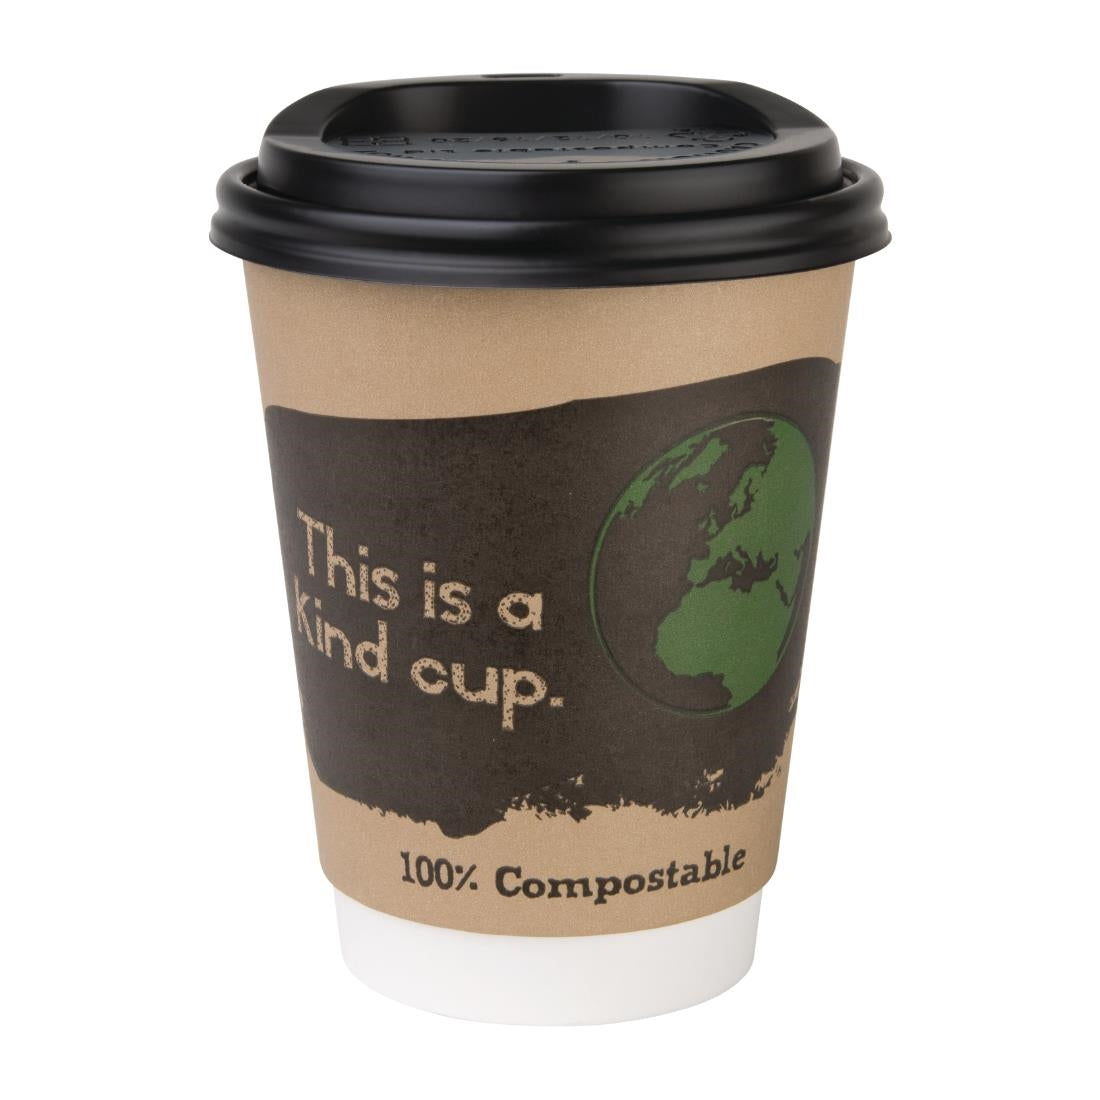 Fiesta Green Compostable Coffee Cup Lids 340ml / 12oz JD Catering Equipment Solutions Ltd